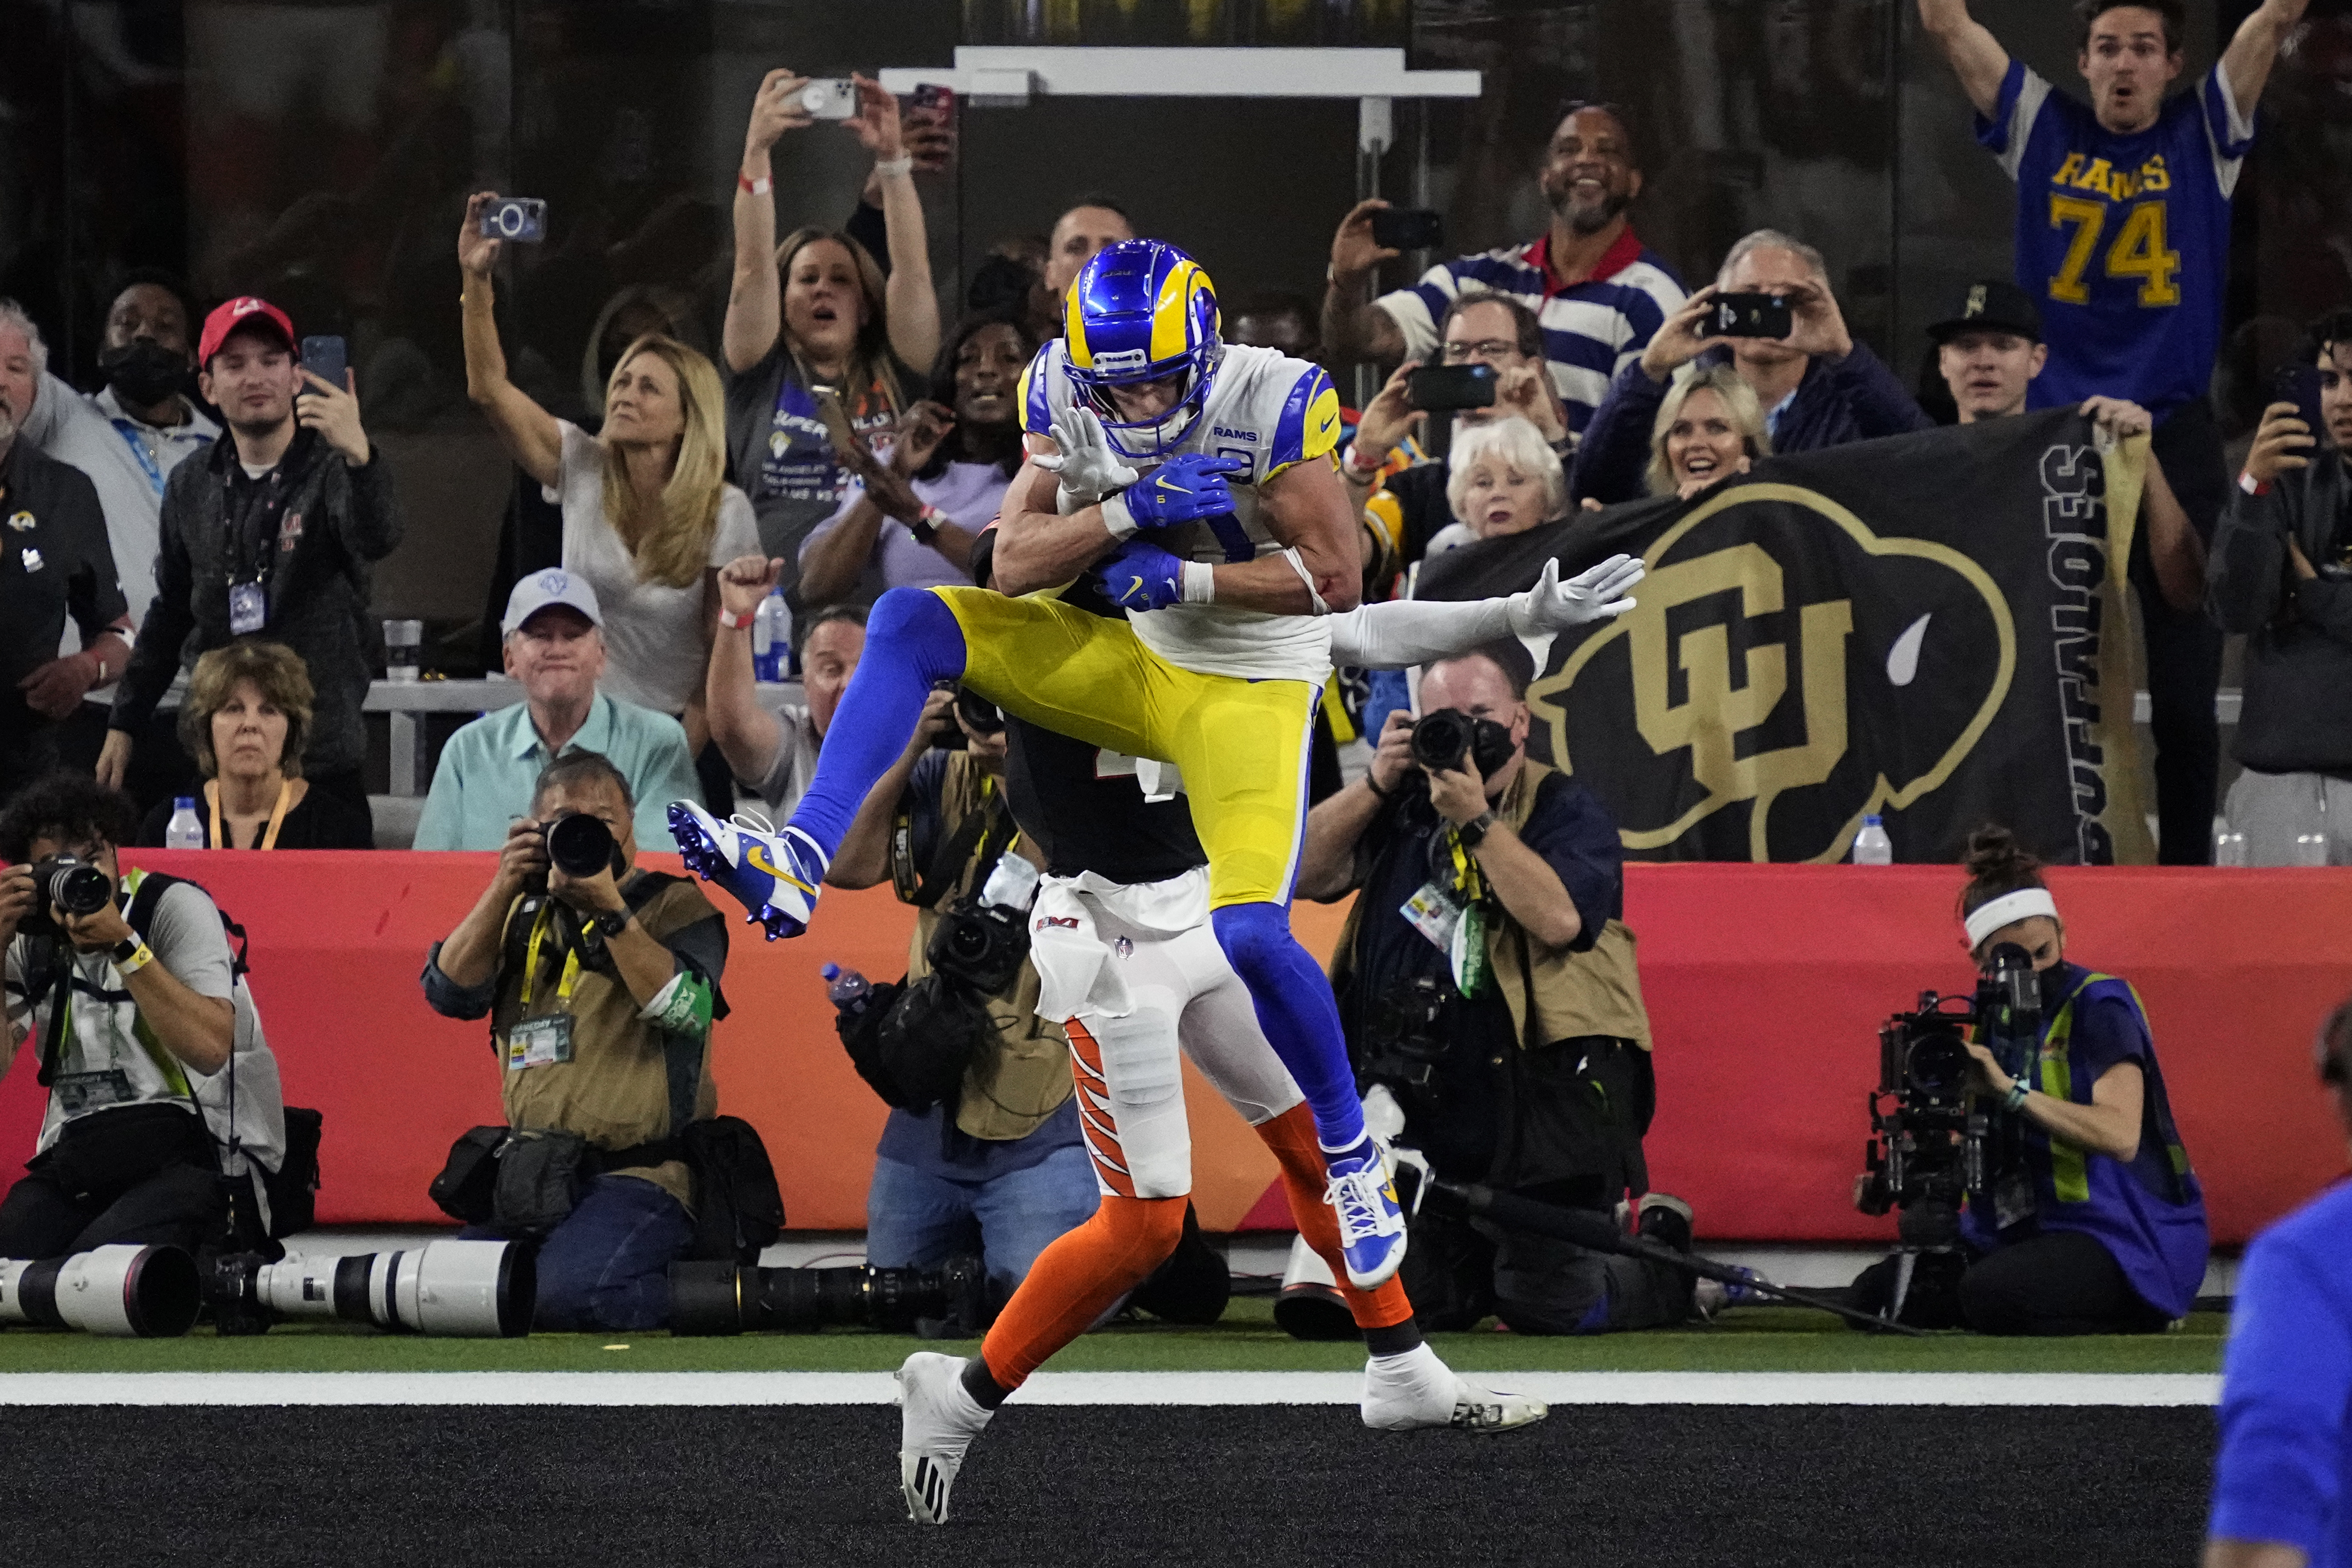 Peck Loose Sobriquette Rams beat Bengals, 23-20, to win second Super Bowl in franchise history